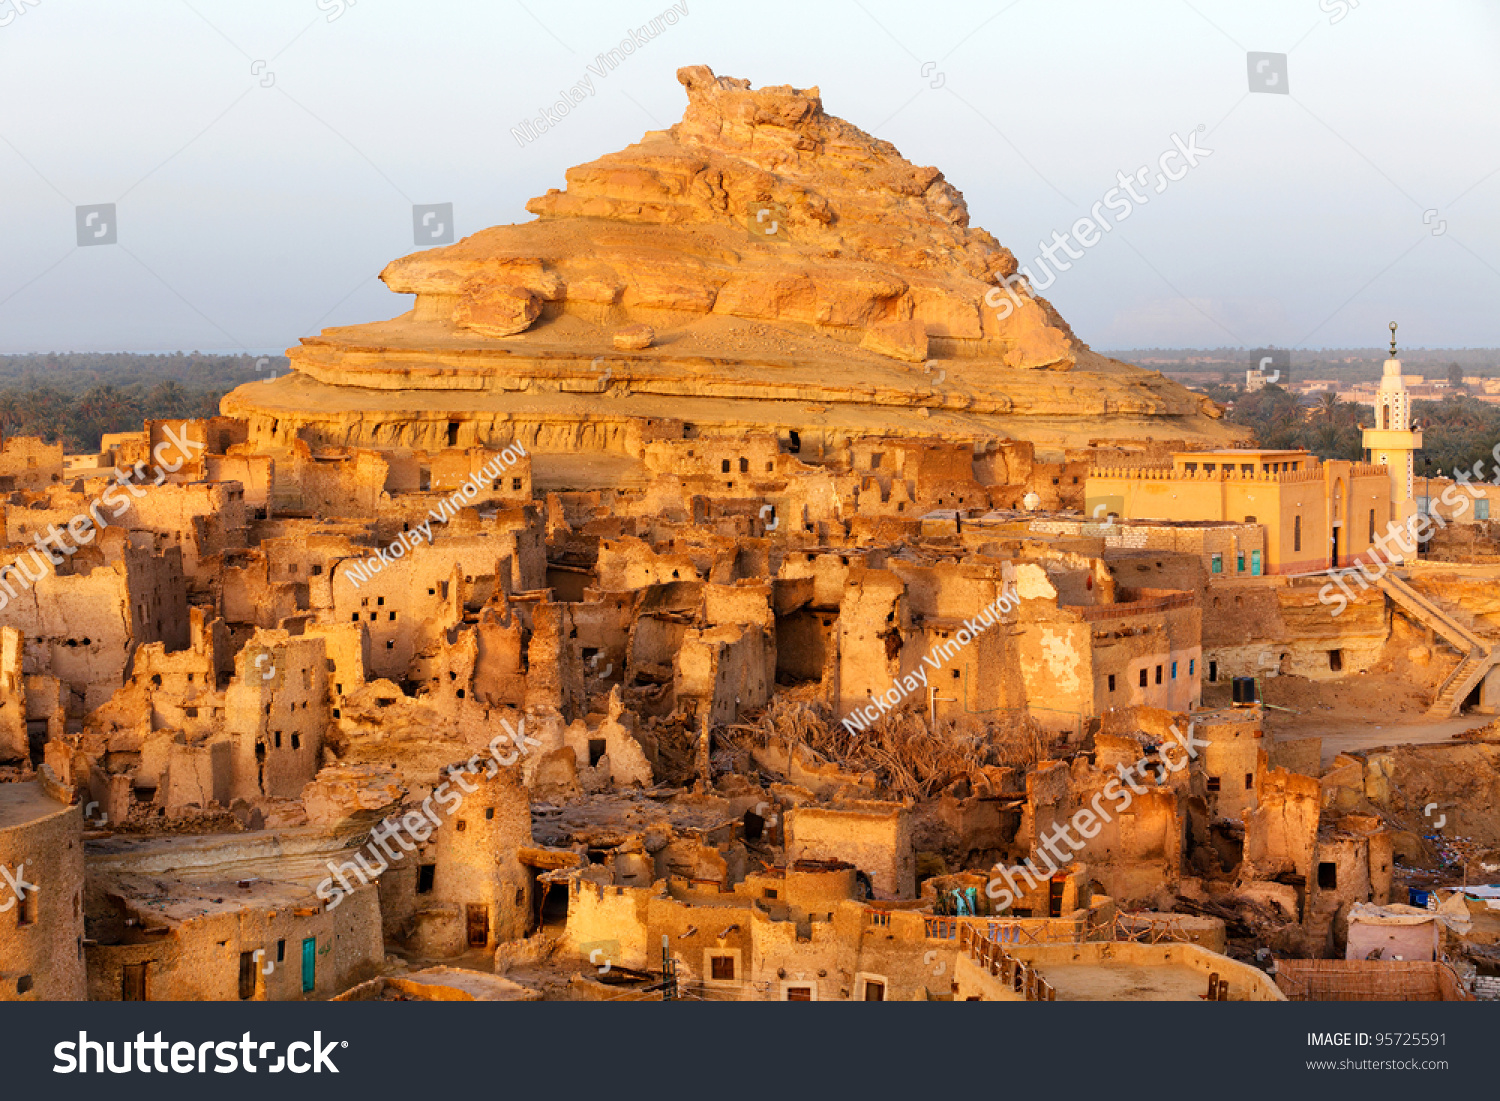 View of the Shali Fortress in Siwa Oasis is an oasis in Egypt, located between the Qattara Depression and the Egyptian Sand Sea in the Libyan Desert. #95725591